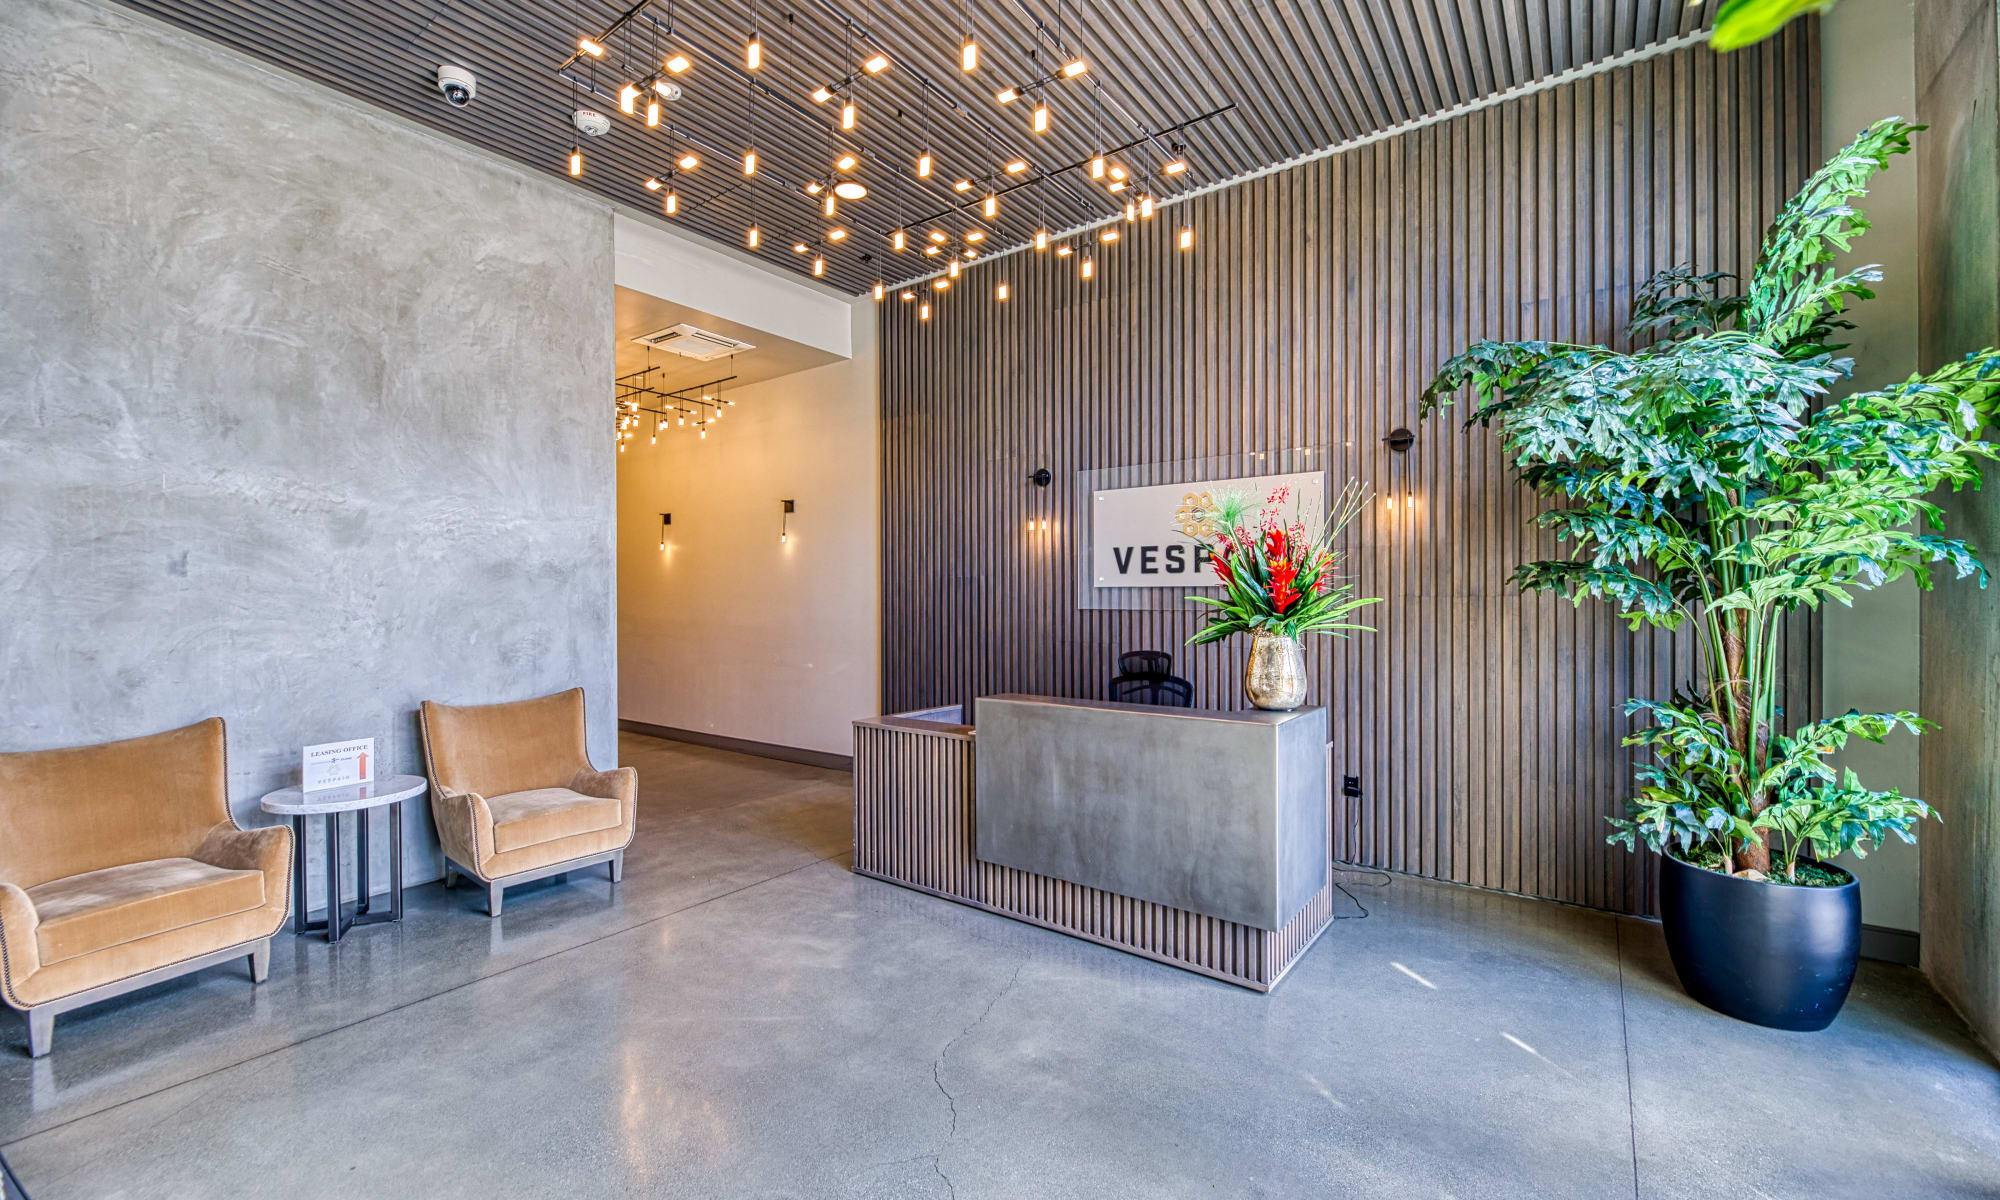 Sitting area and front desk at lobby of Vespaio in San Jose, California